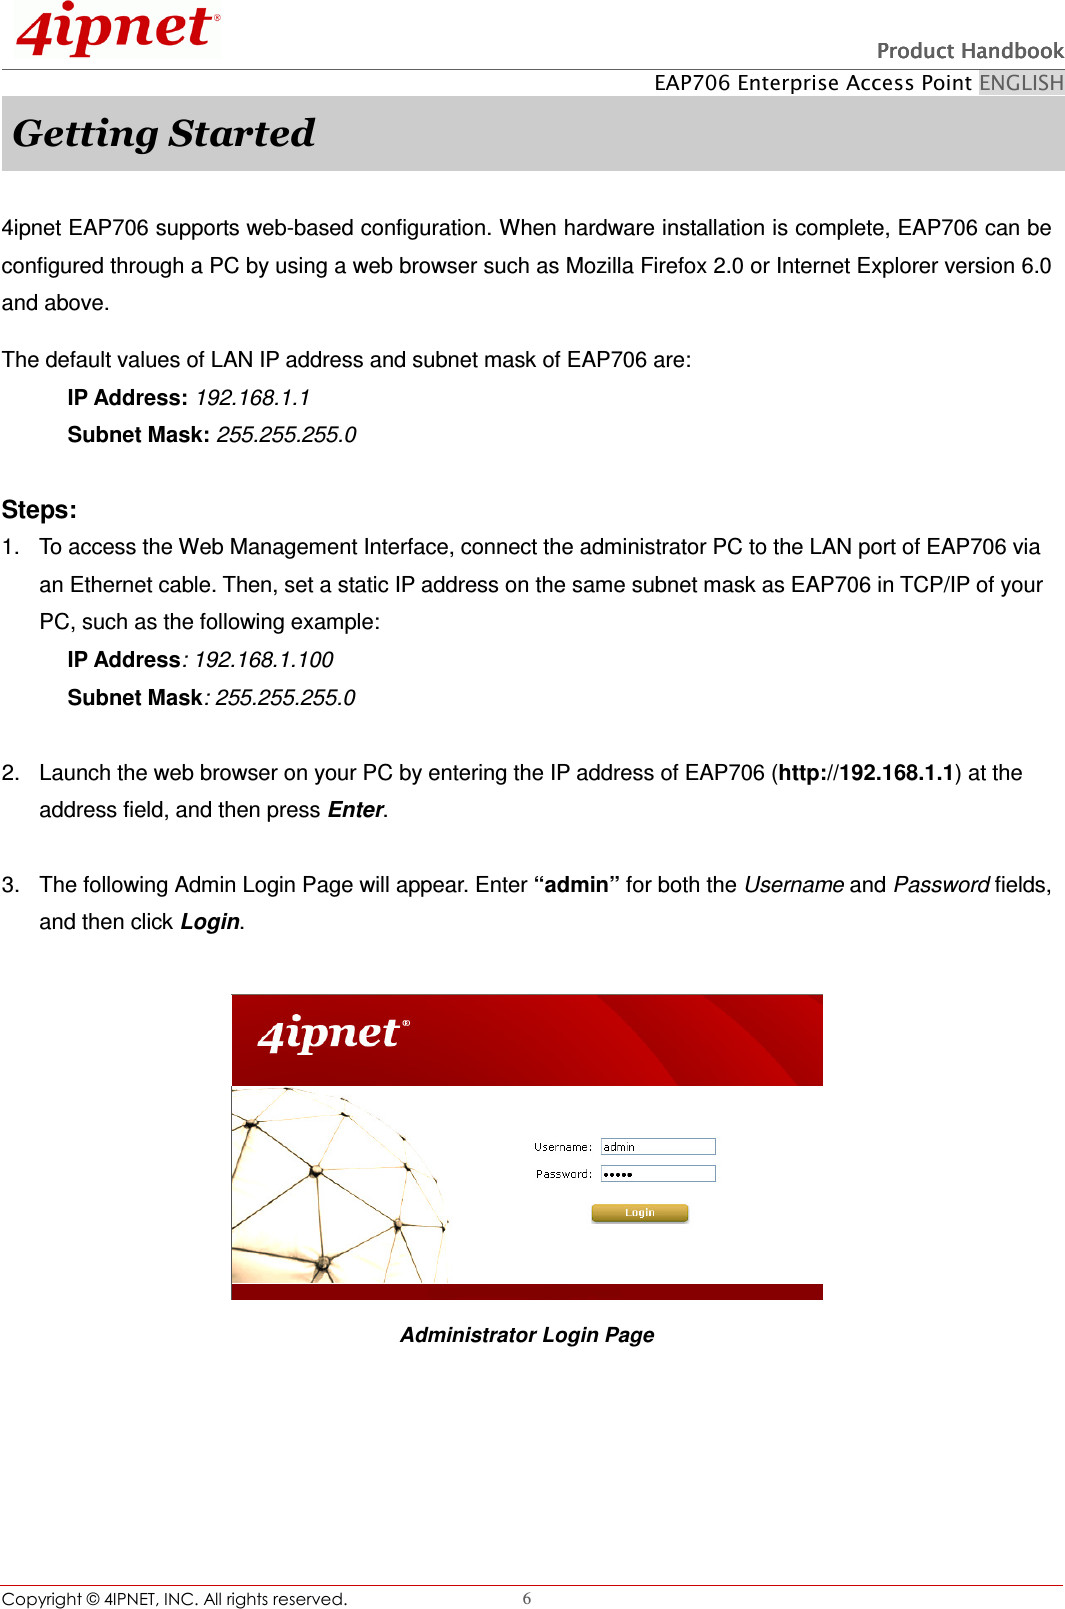   Product HandbookProduct HandbookProduct HandbookProduct Handbook    EAP706 Enterprise Access Point ENGLISH Copyright © 4IPNET, INC. All rights reserved.                                                              6 Getting Started  4ipnet EAP706 supports web-based configuration. When hardware installation is complete, EAP706 can be configured through a PC by using a web browser such as Mozilla Firefox 2.0 or Internet Explorer version 6.0 and above. The default values of LAN IP address and subnet mask of EAP706 are: IP Address: 192.168.1.1 Subnet Mask: 255.255.255.0    Steps: 1.  To access the Web Management Interface, connect the administrator PC to the LAN port of EAP706 via an Ethernet cable. Then, set a static IP address on the same subnet mask as EAP706 in TCP/IP of your PC, such as the following example: IP Address: 192.168.1.100 Subnet Mask: 255.255.255.0    2.  Launch the web browser on your PC by entering the IP address of EAP706 (http://192.168.1.1) at the address field, and then press Enter.  3.  The following Admin Login Page will appear. Enter “admin” for both the Username and Password fields, and then click Login.   Administrator Login Page      